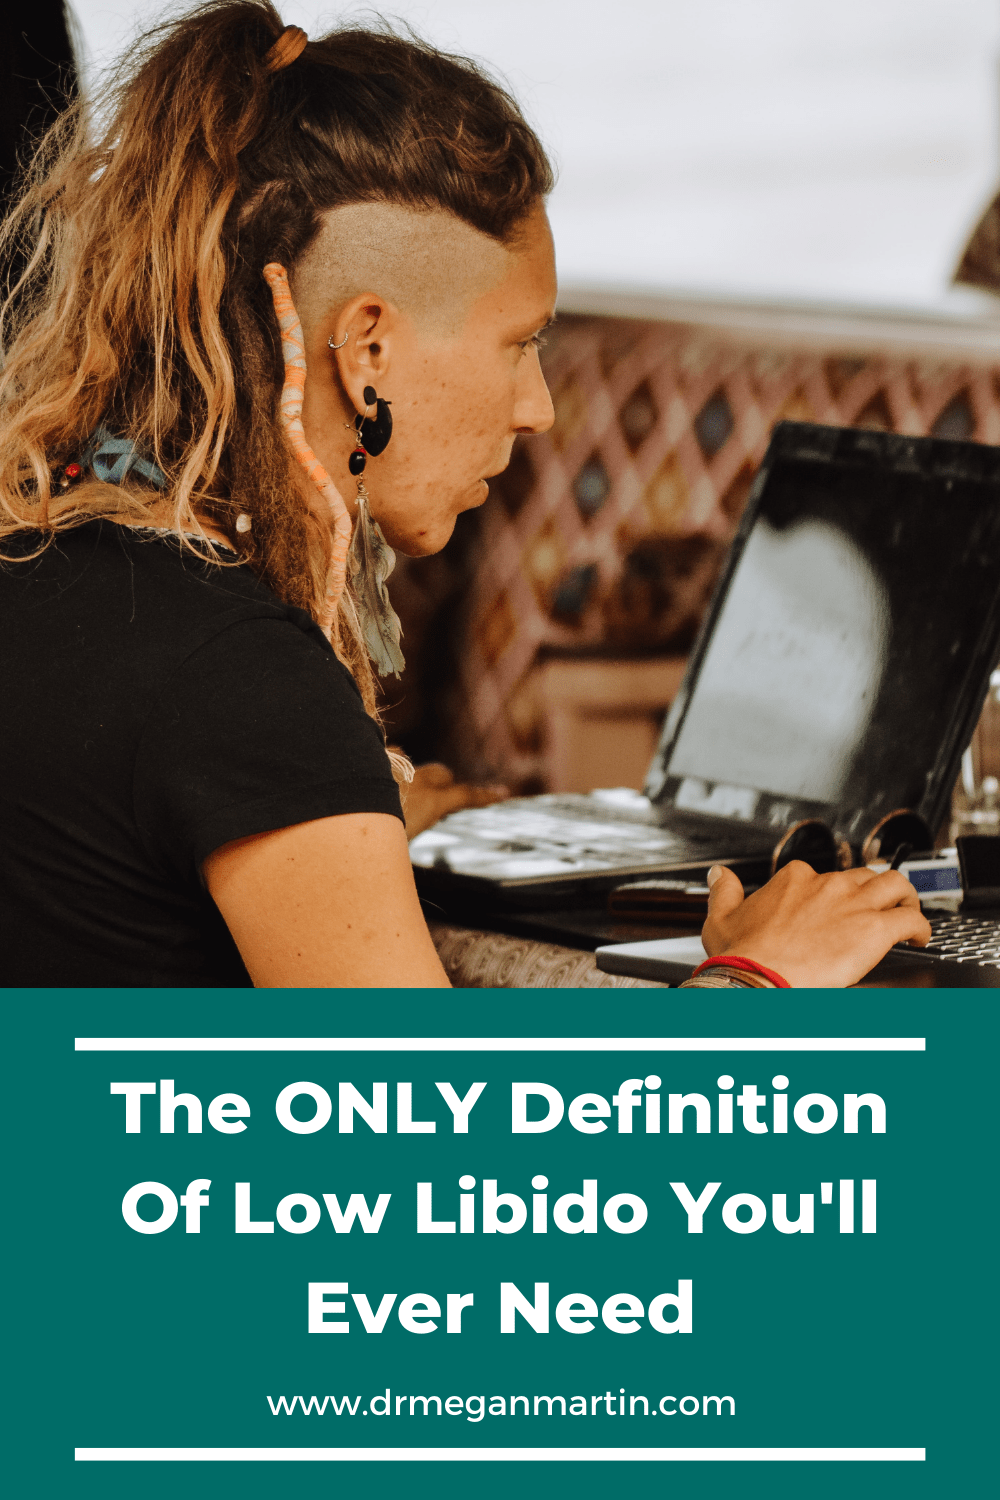 Pin describing the only definition of low libido you'll ever need